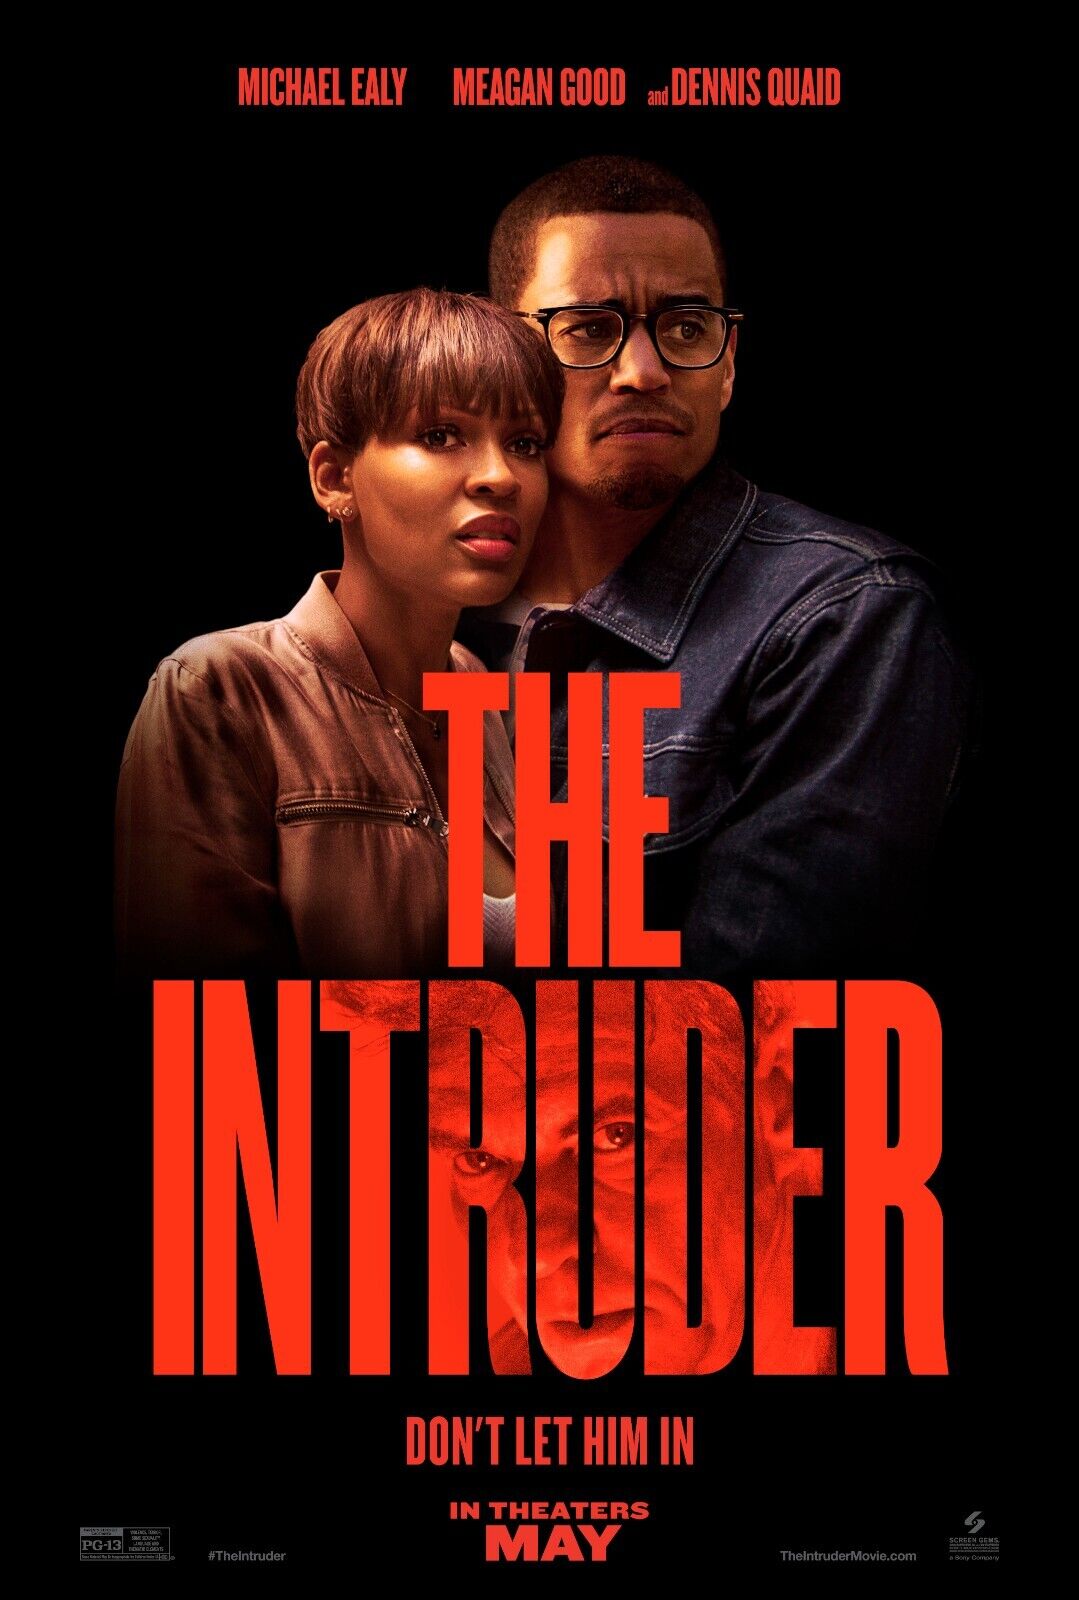 The Intruder Movie Poster 2019 - 11x17 Inches | NEW USA